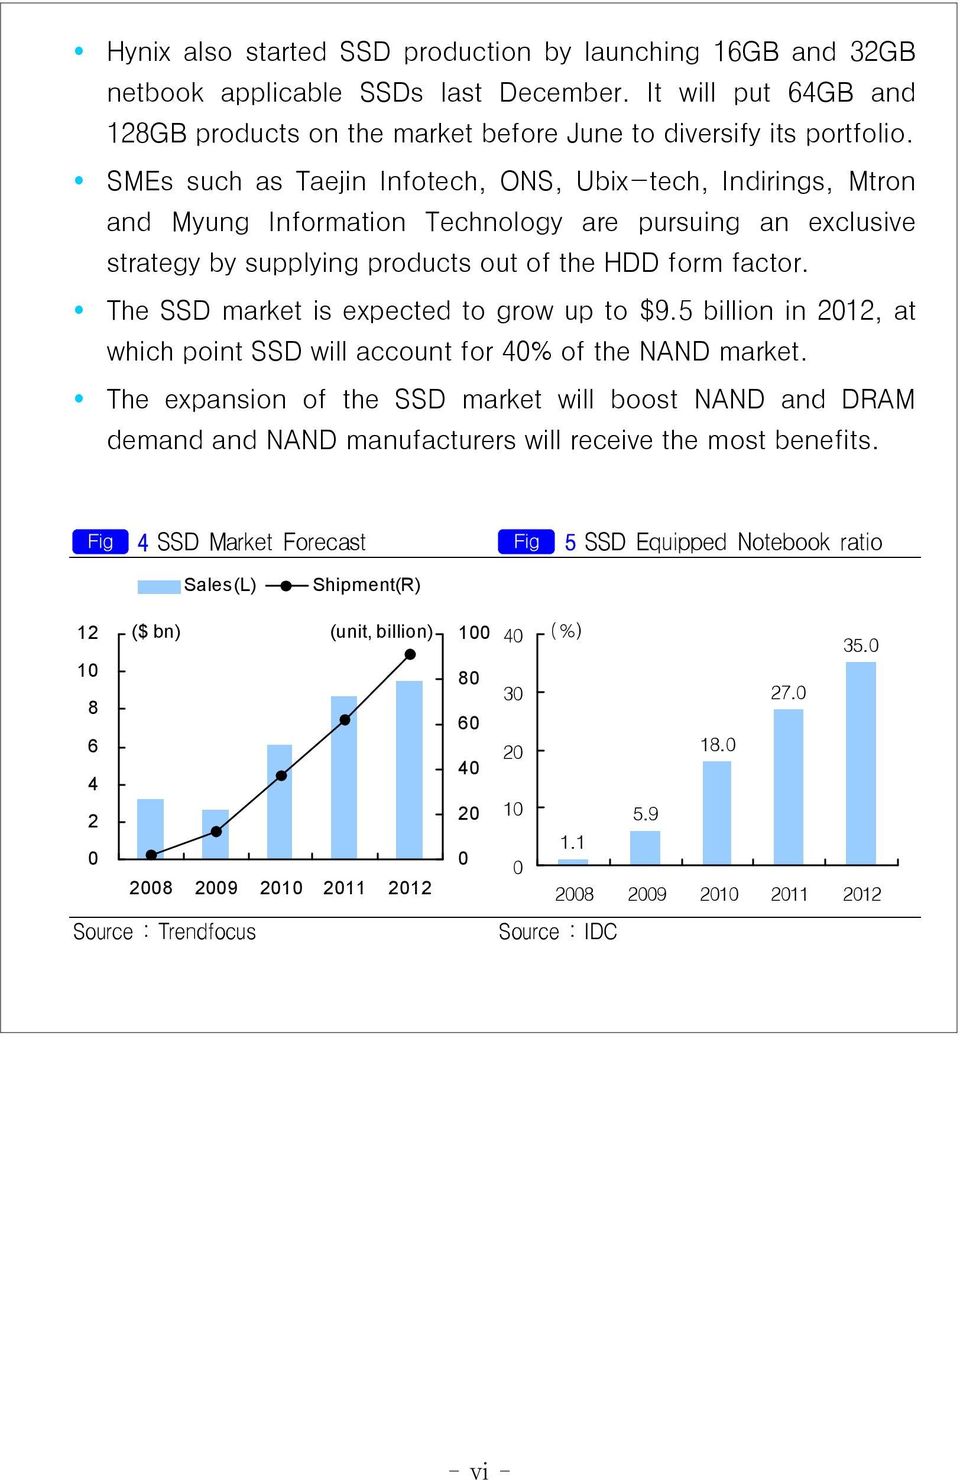 The SSD market is expected to grow up to $9.5 billion in 2012, at which point SSD will account for 40% of the NAND market.